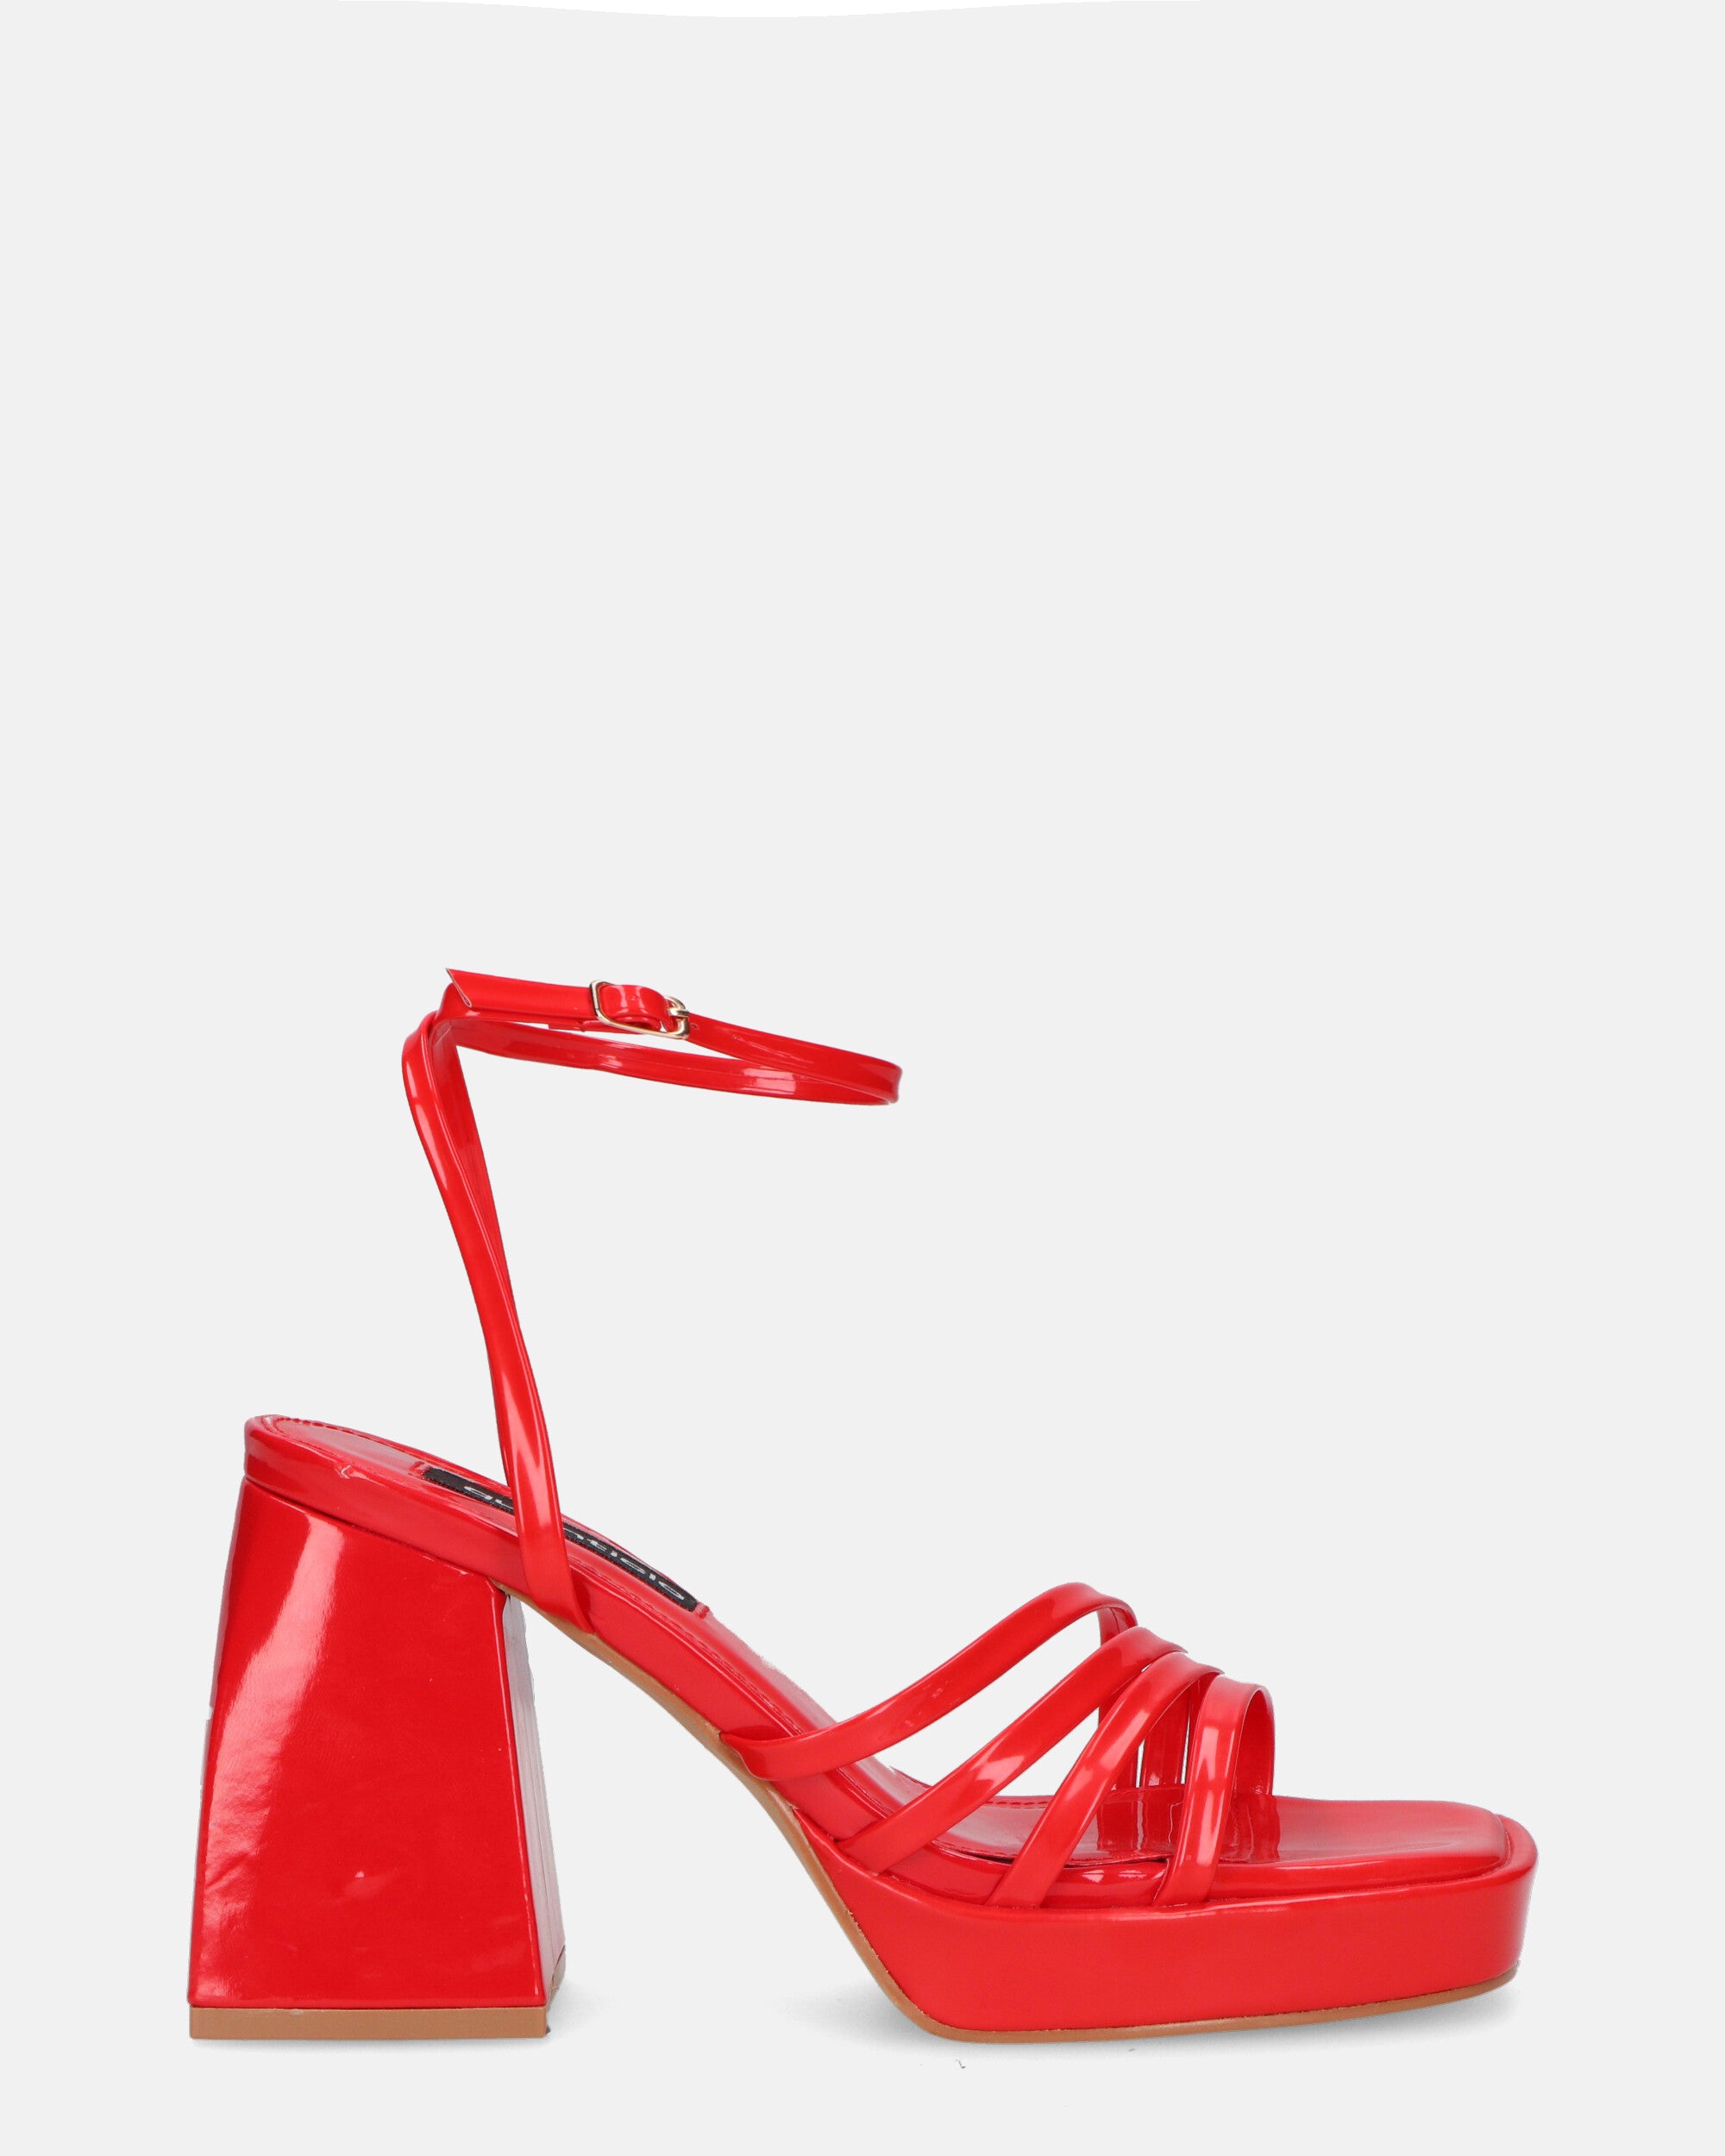 WINONA - red glassy sandals with squared heel